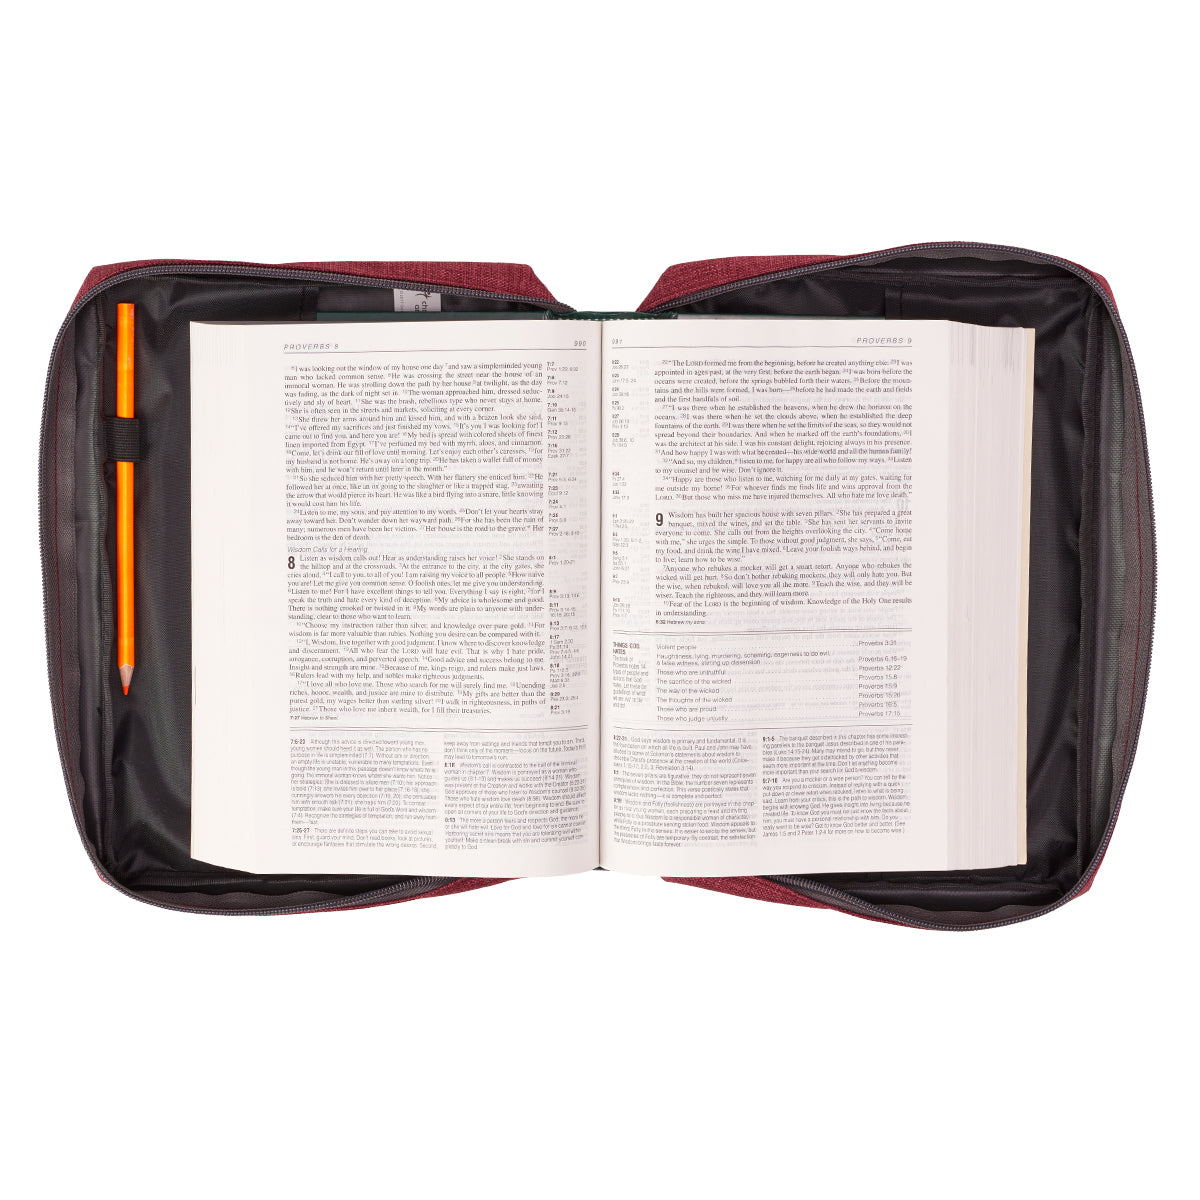 Image of Burgundy Poly-Canvas Value Bible Cover with Fish Badge other